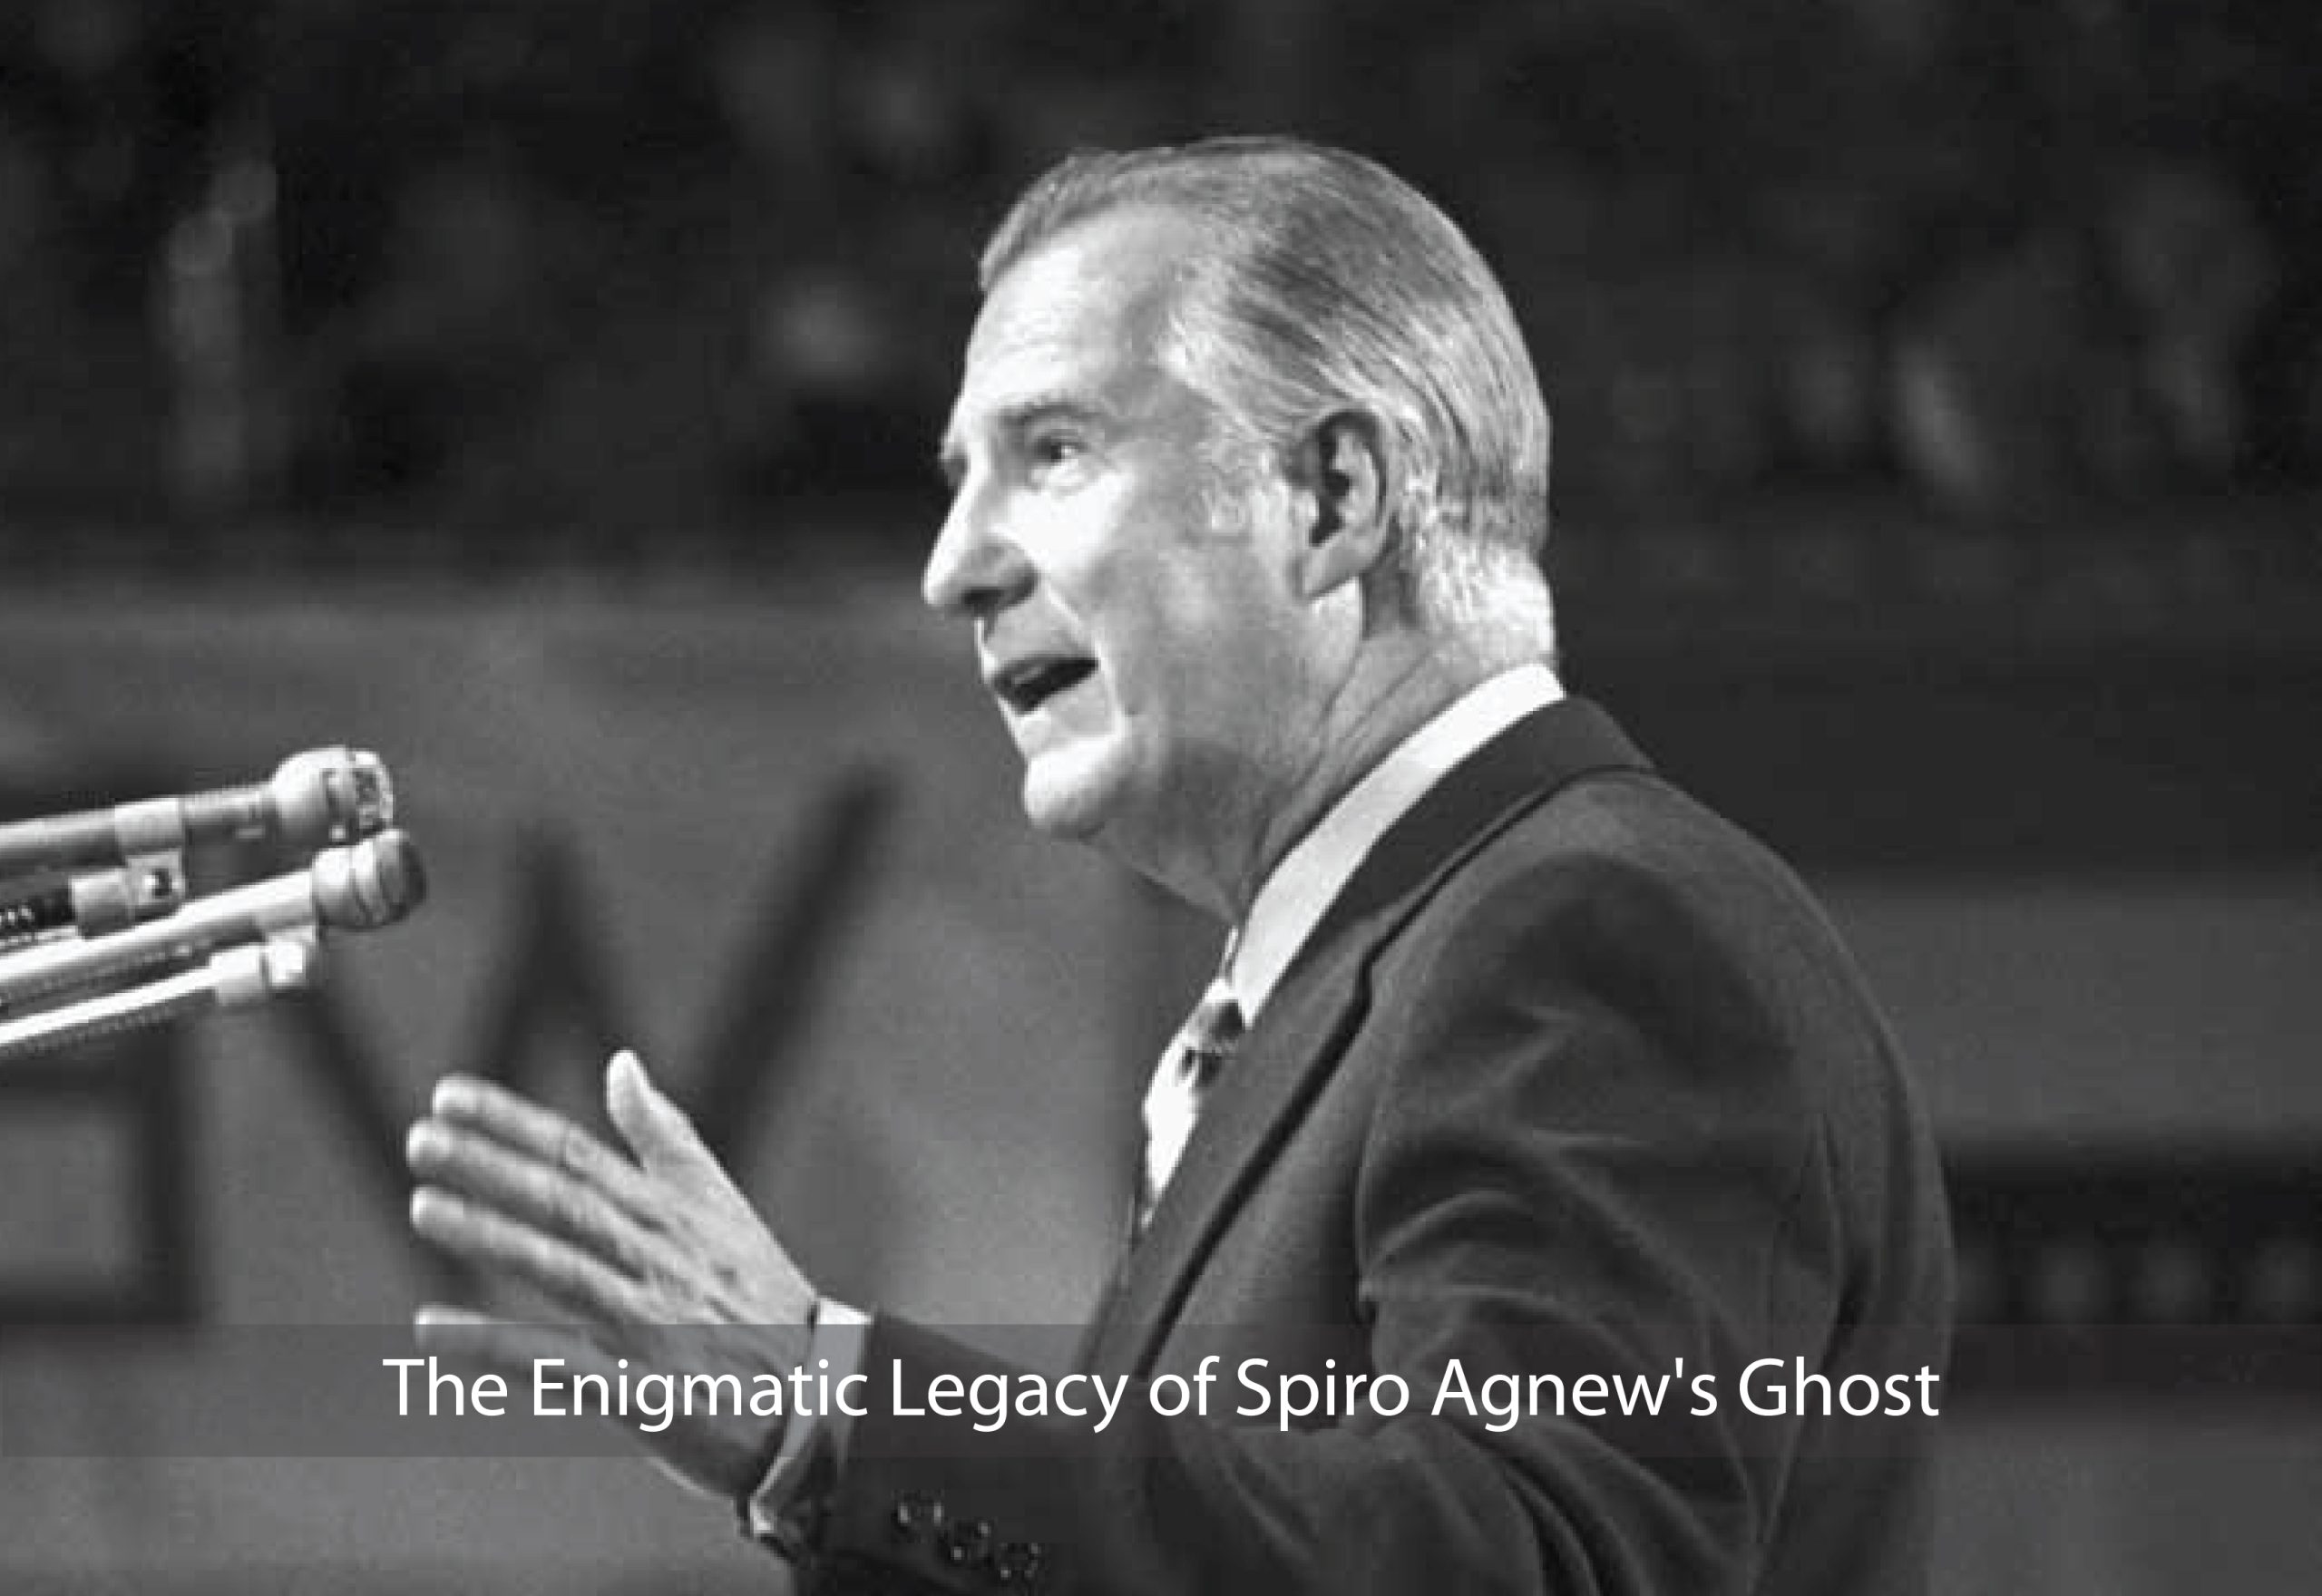 The Enigmatic Legacy of Spiro Agnew's Ghost